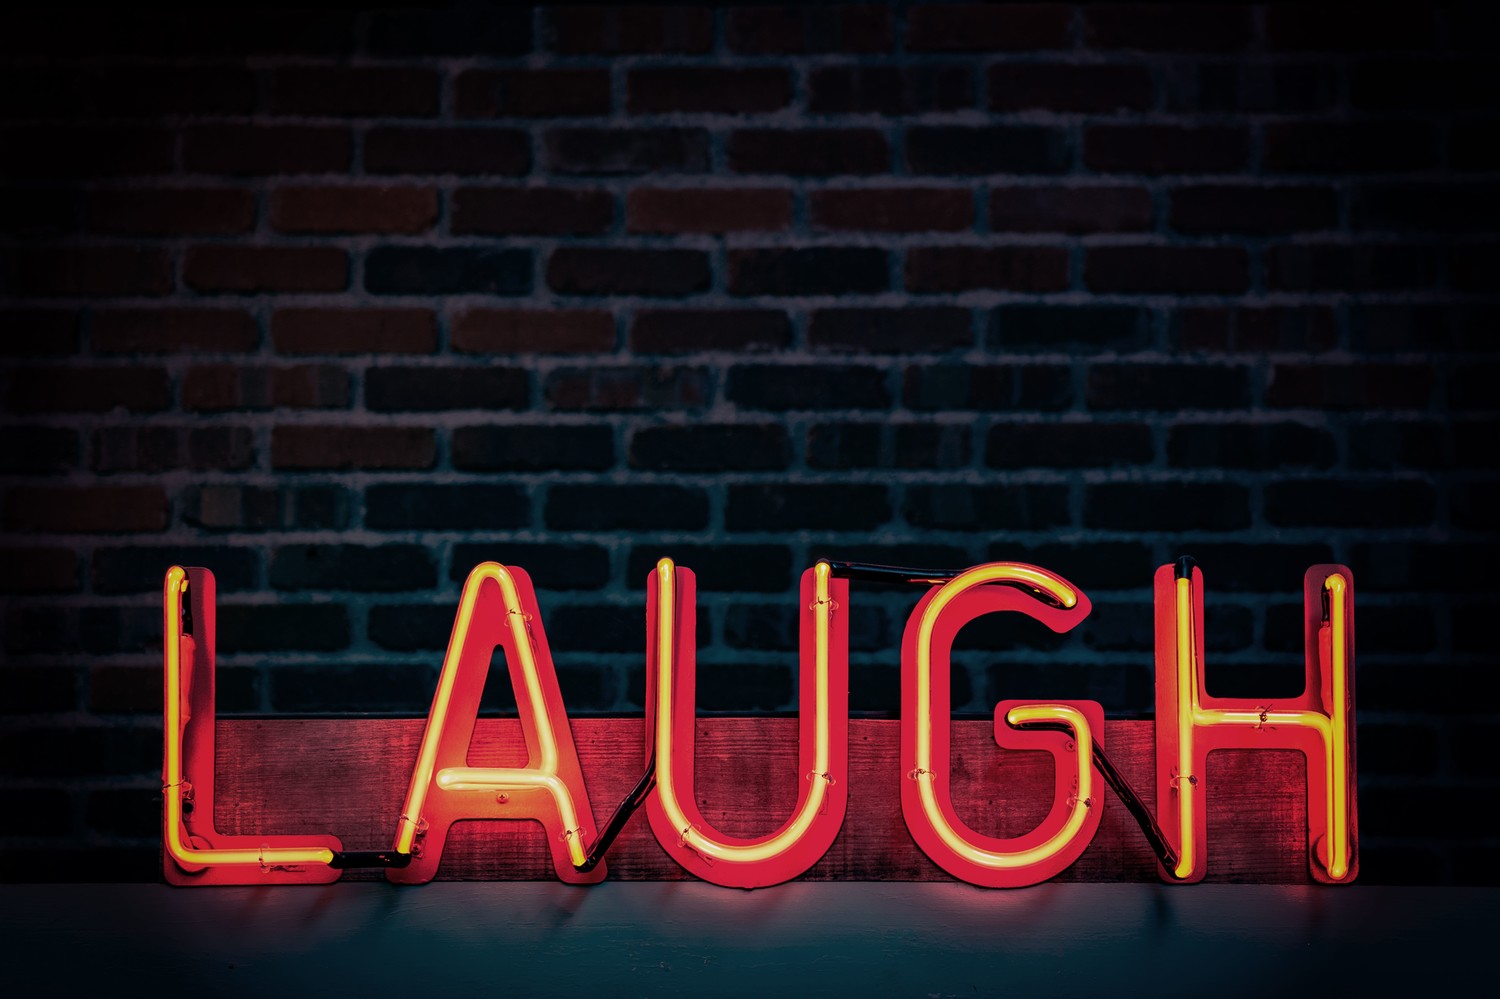 Why Finding the Funny is Good for Our Hearts and Souls